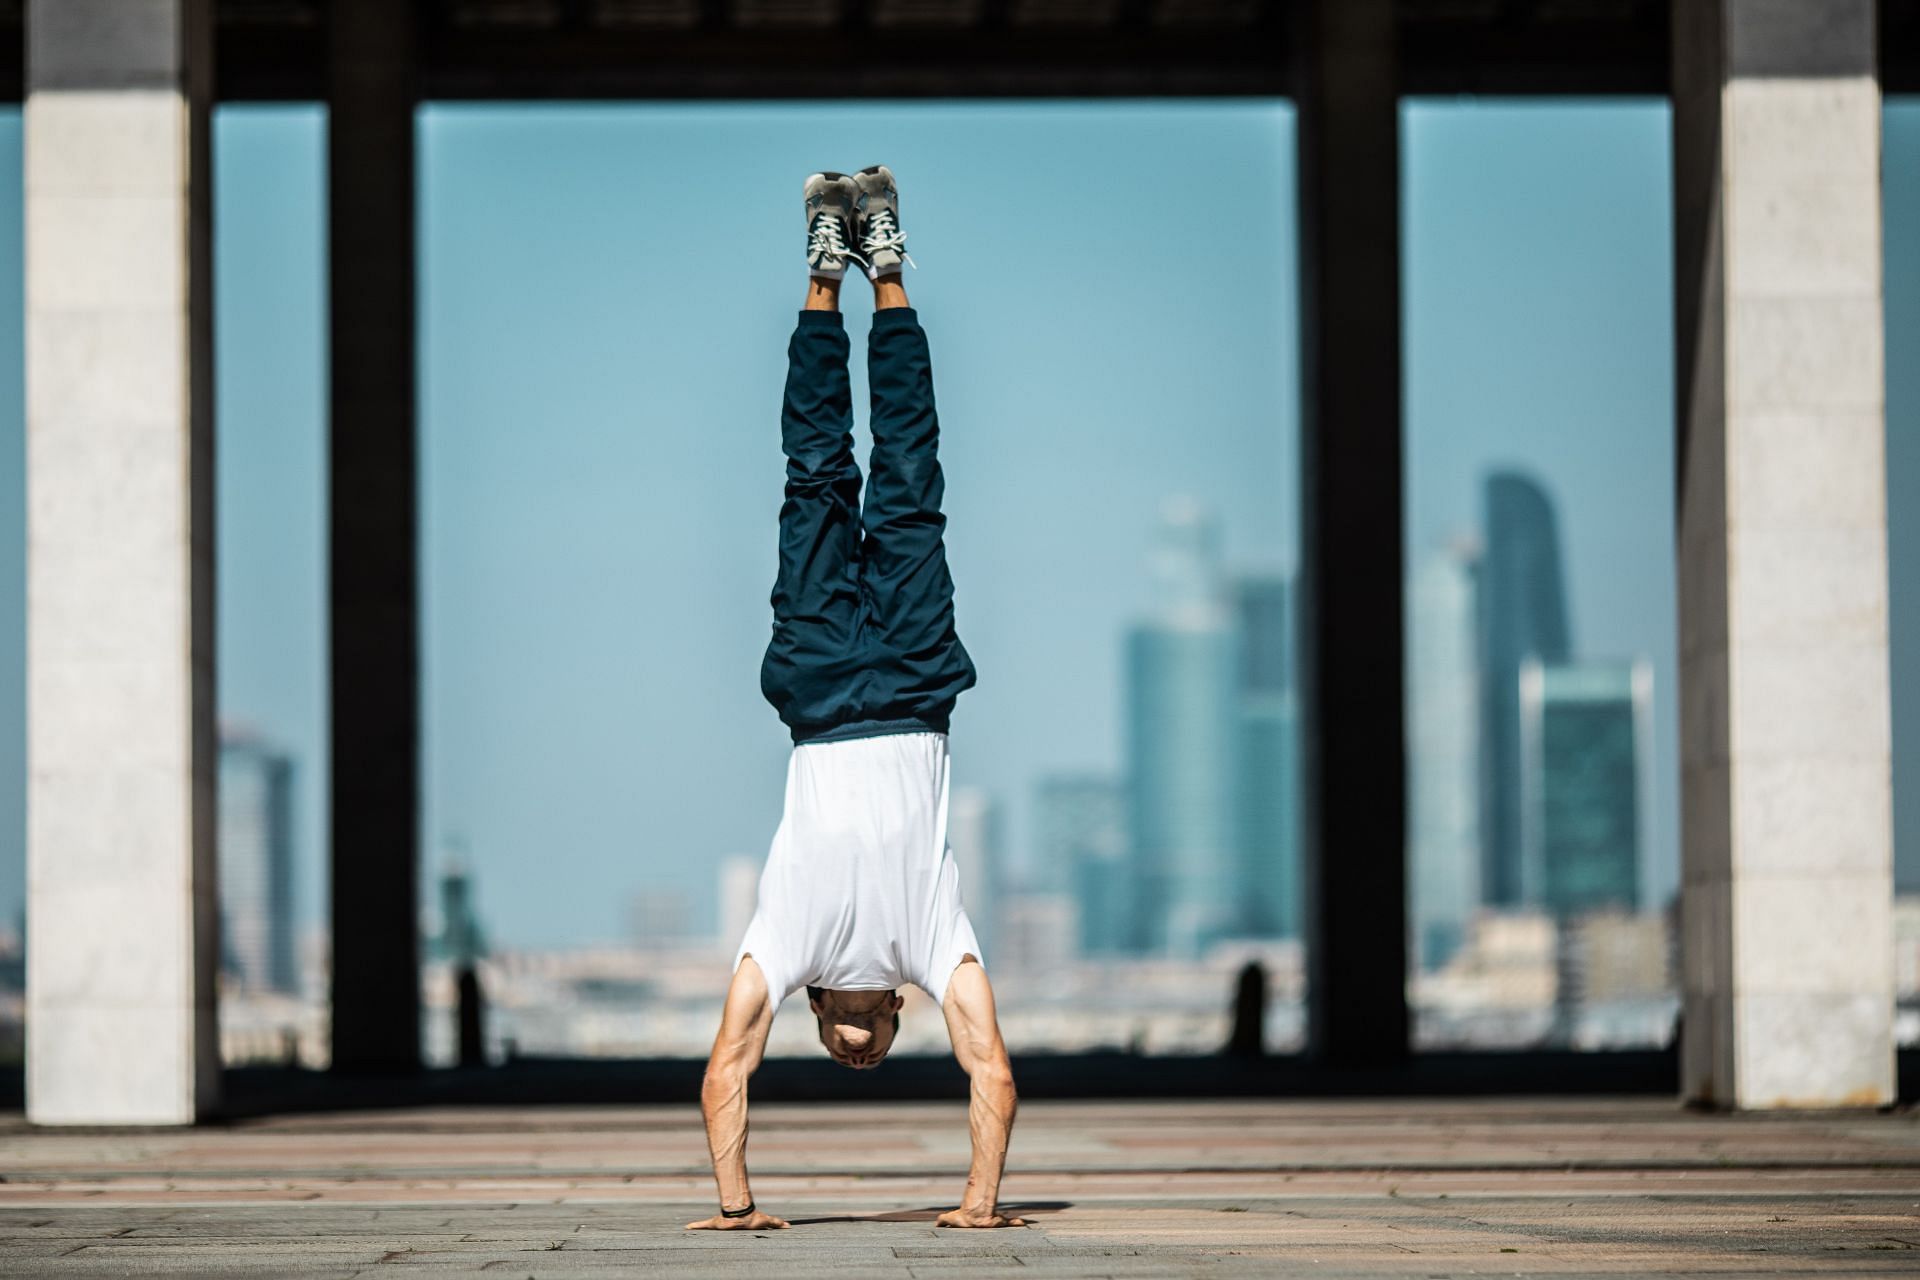 You can try effective calisthenic workouts instead of going to the gym. (Image via Niko Twisty/Pexels)